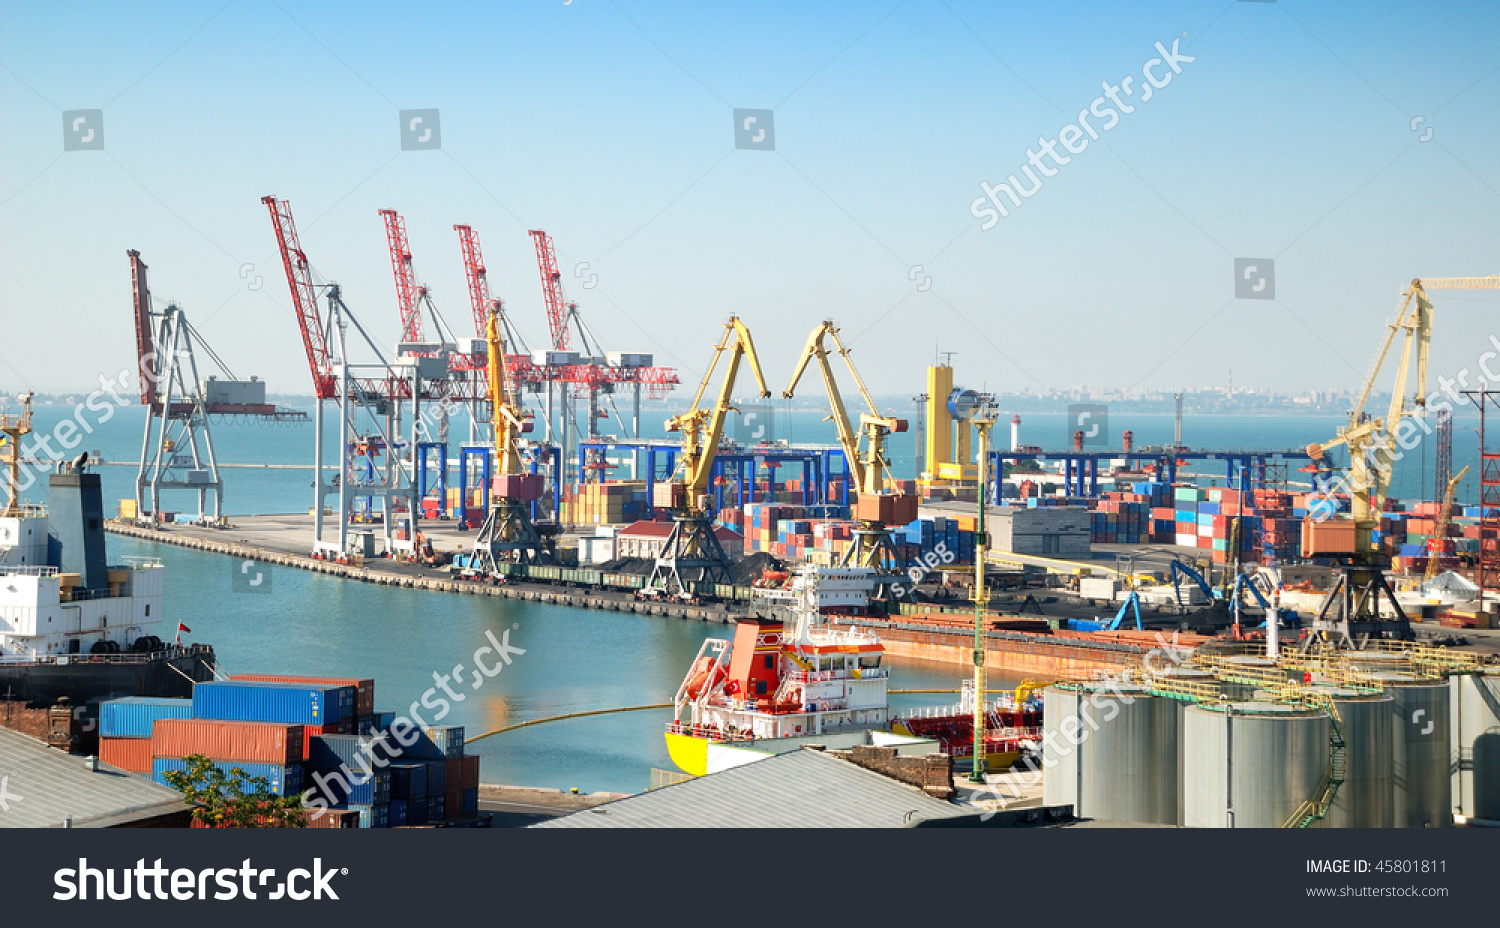 Port warehouse with containers and industrial cargoes #45801811